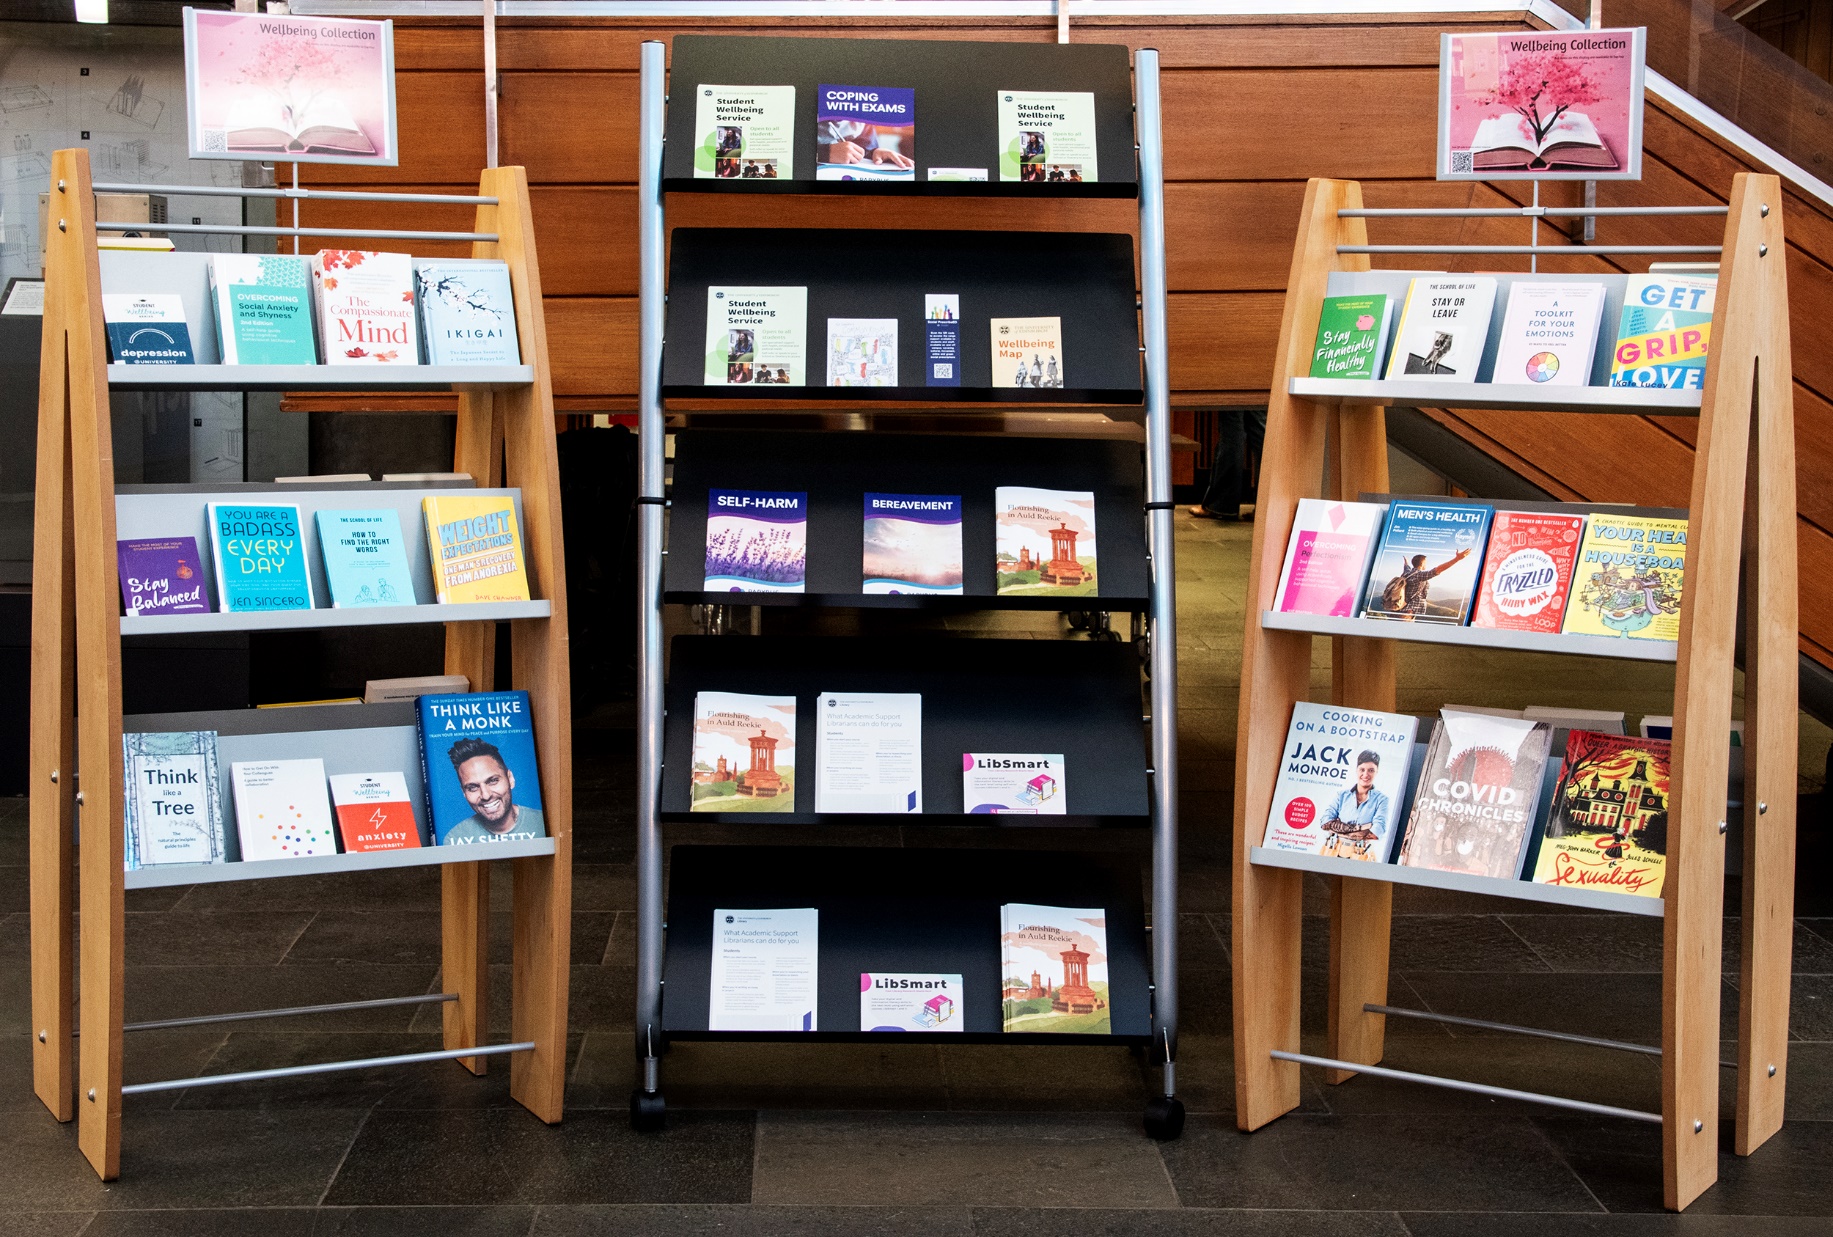 Wellbeing Collection books on display in the Main Library